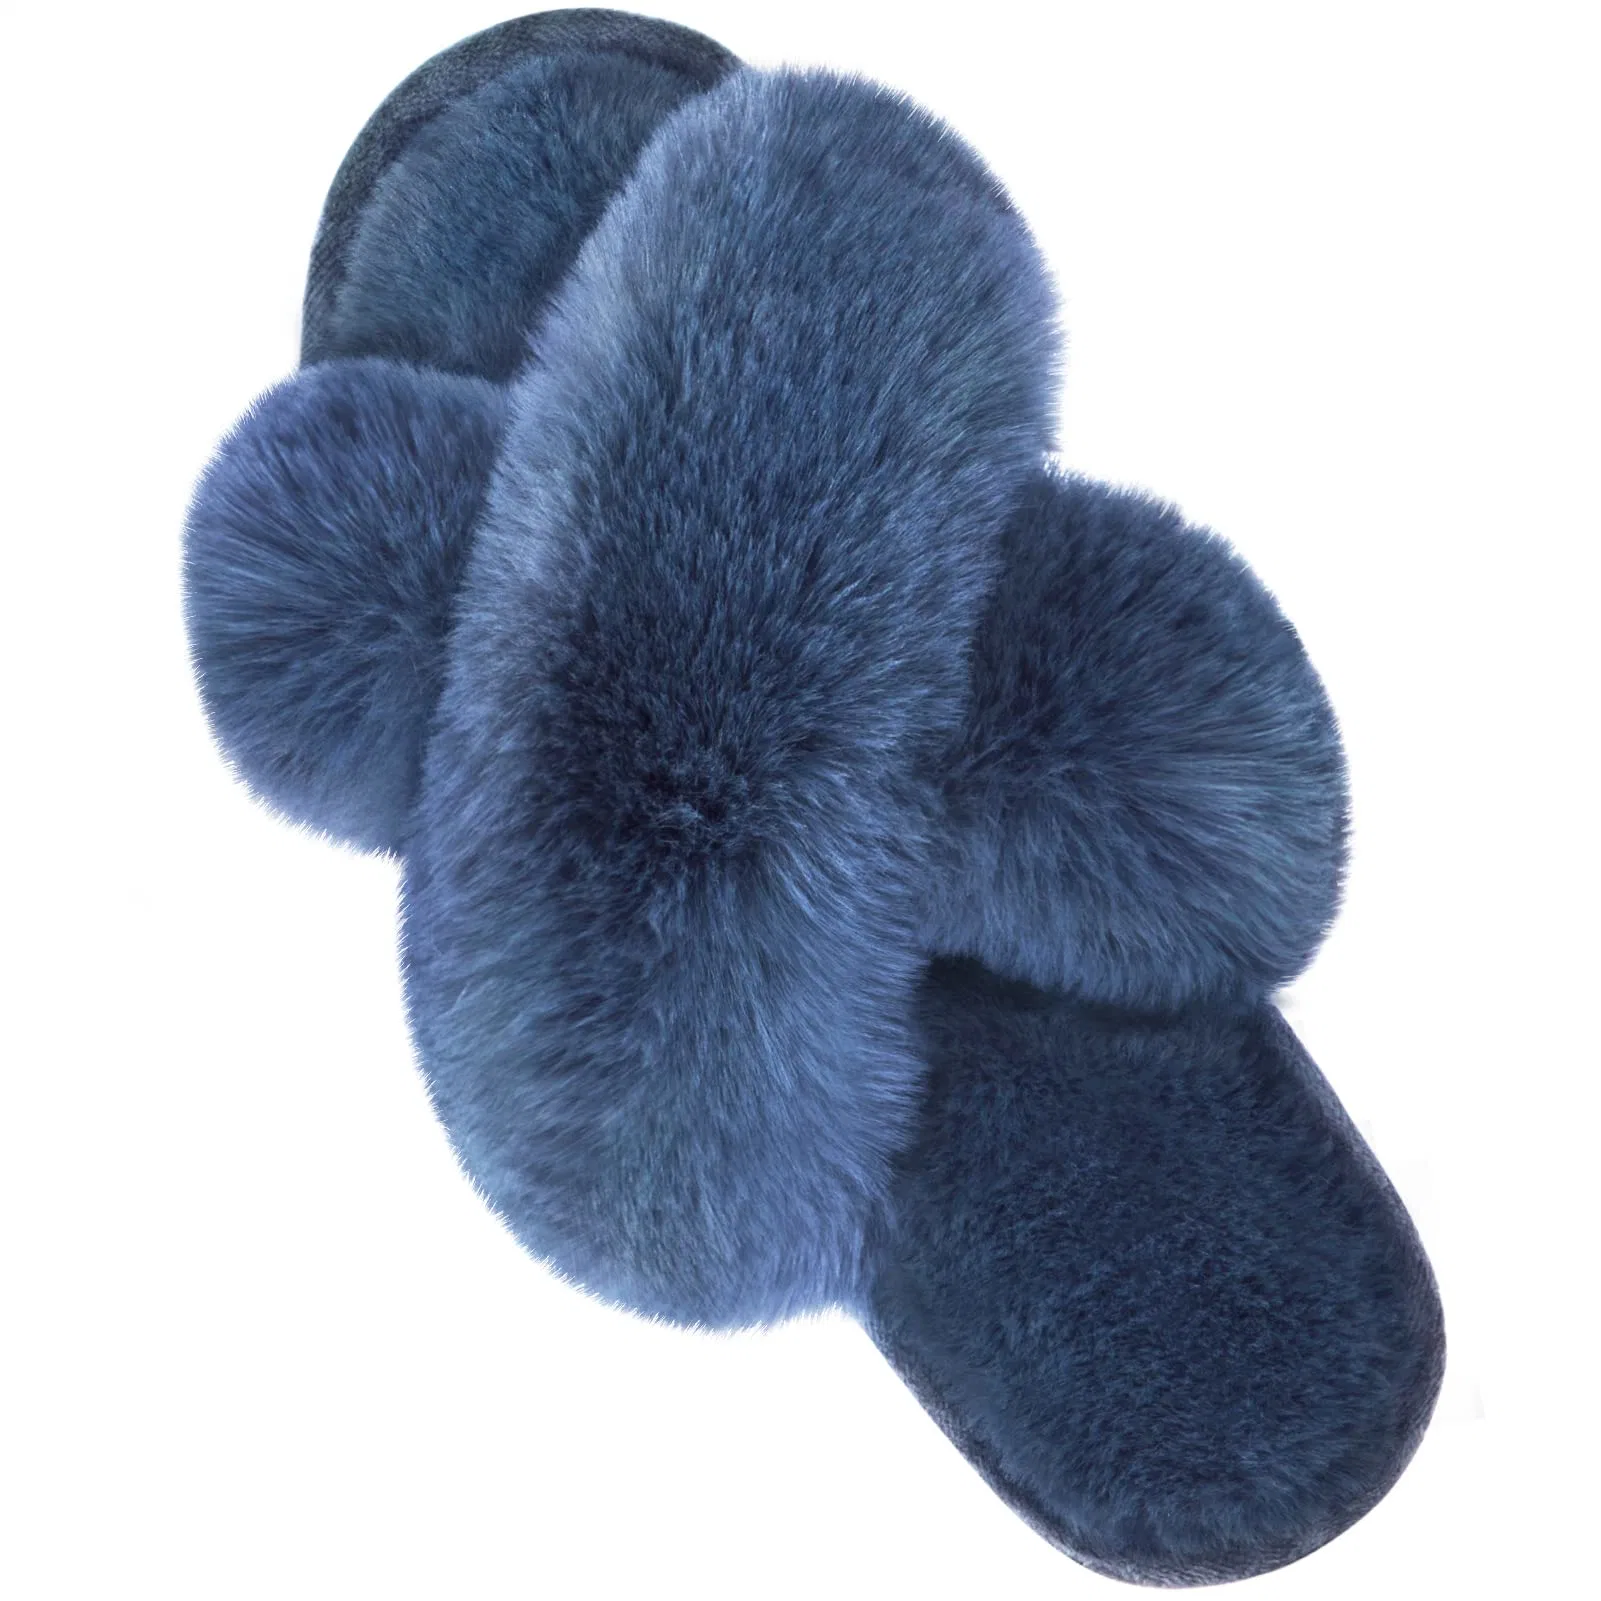 Fluffy Furry Open Toe House Shoes Indoor Outdoor Slide Slipper